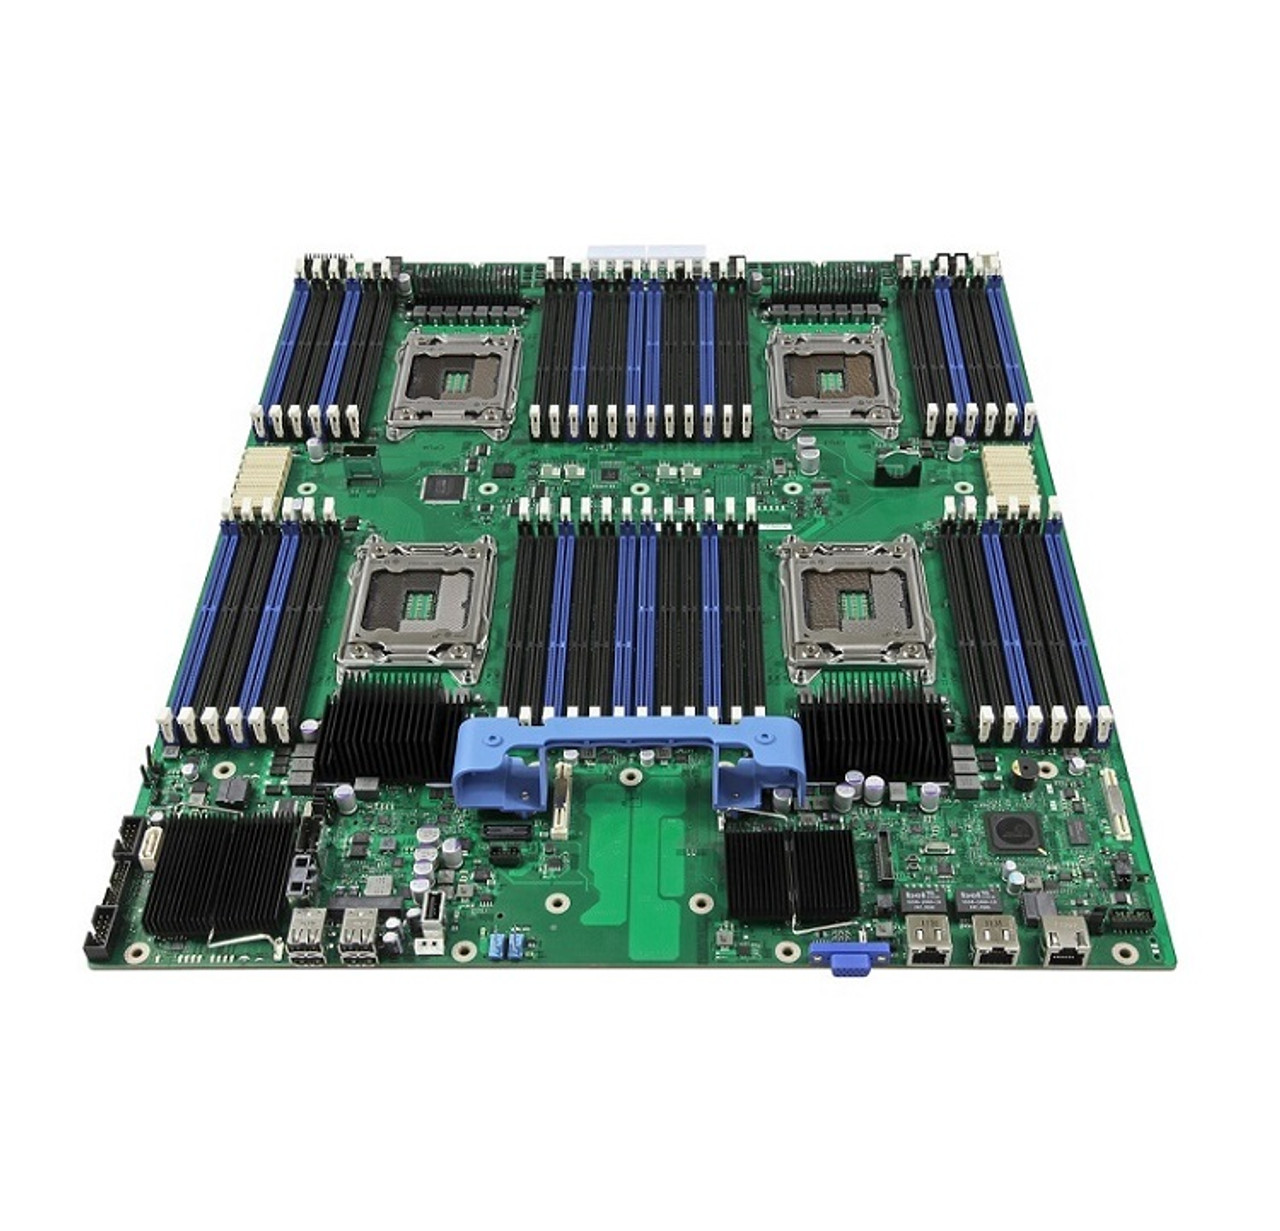 073X7W - Dell System Board (Motherboard) for PowerEdge C6100 Server